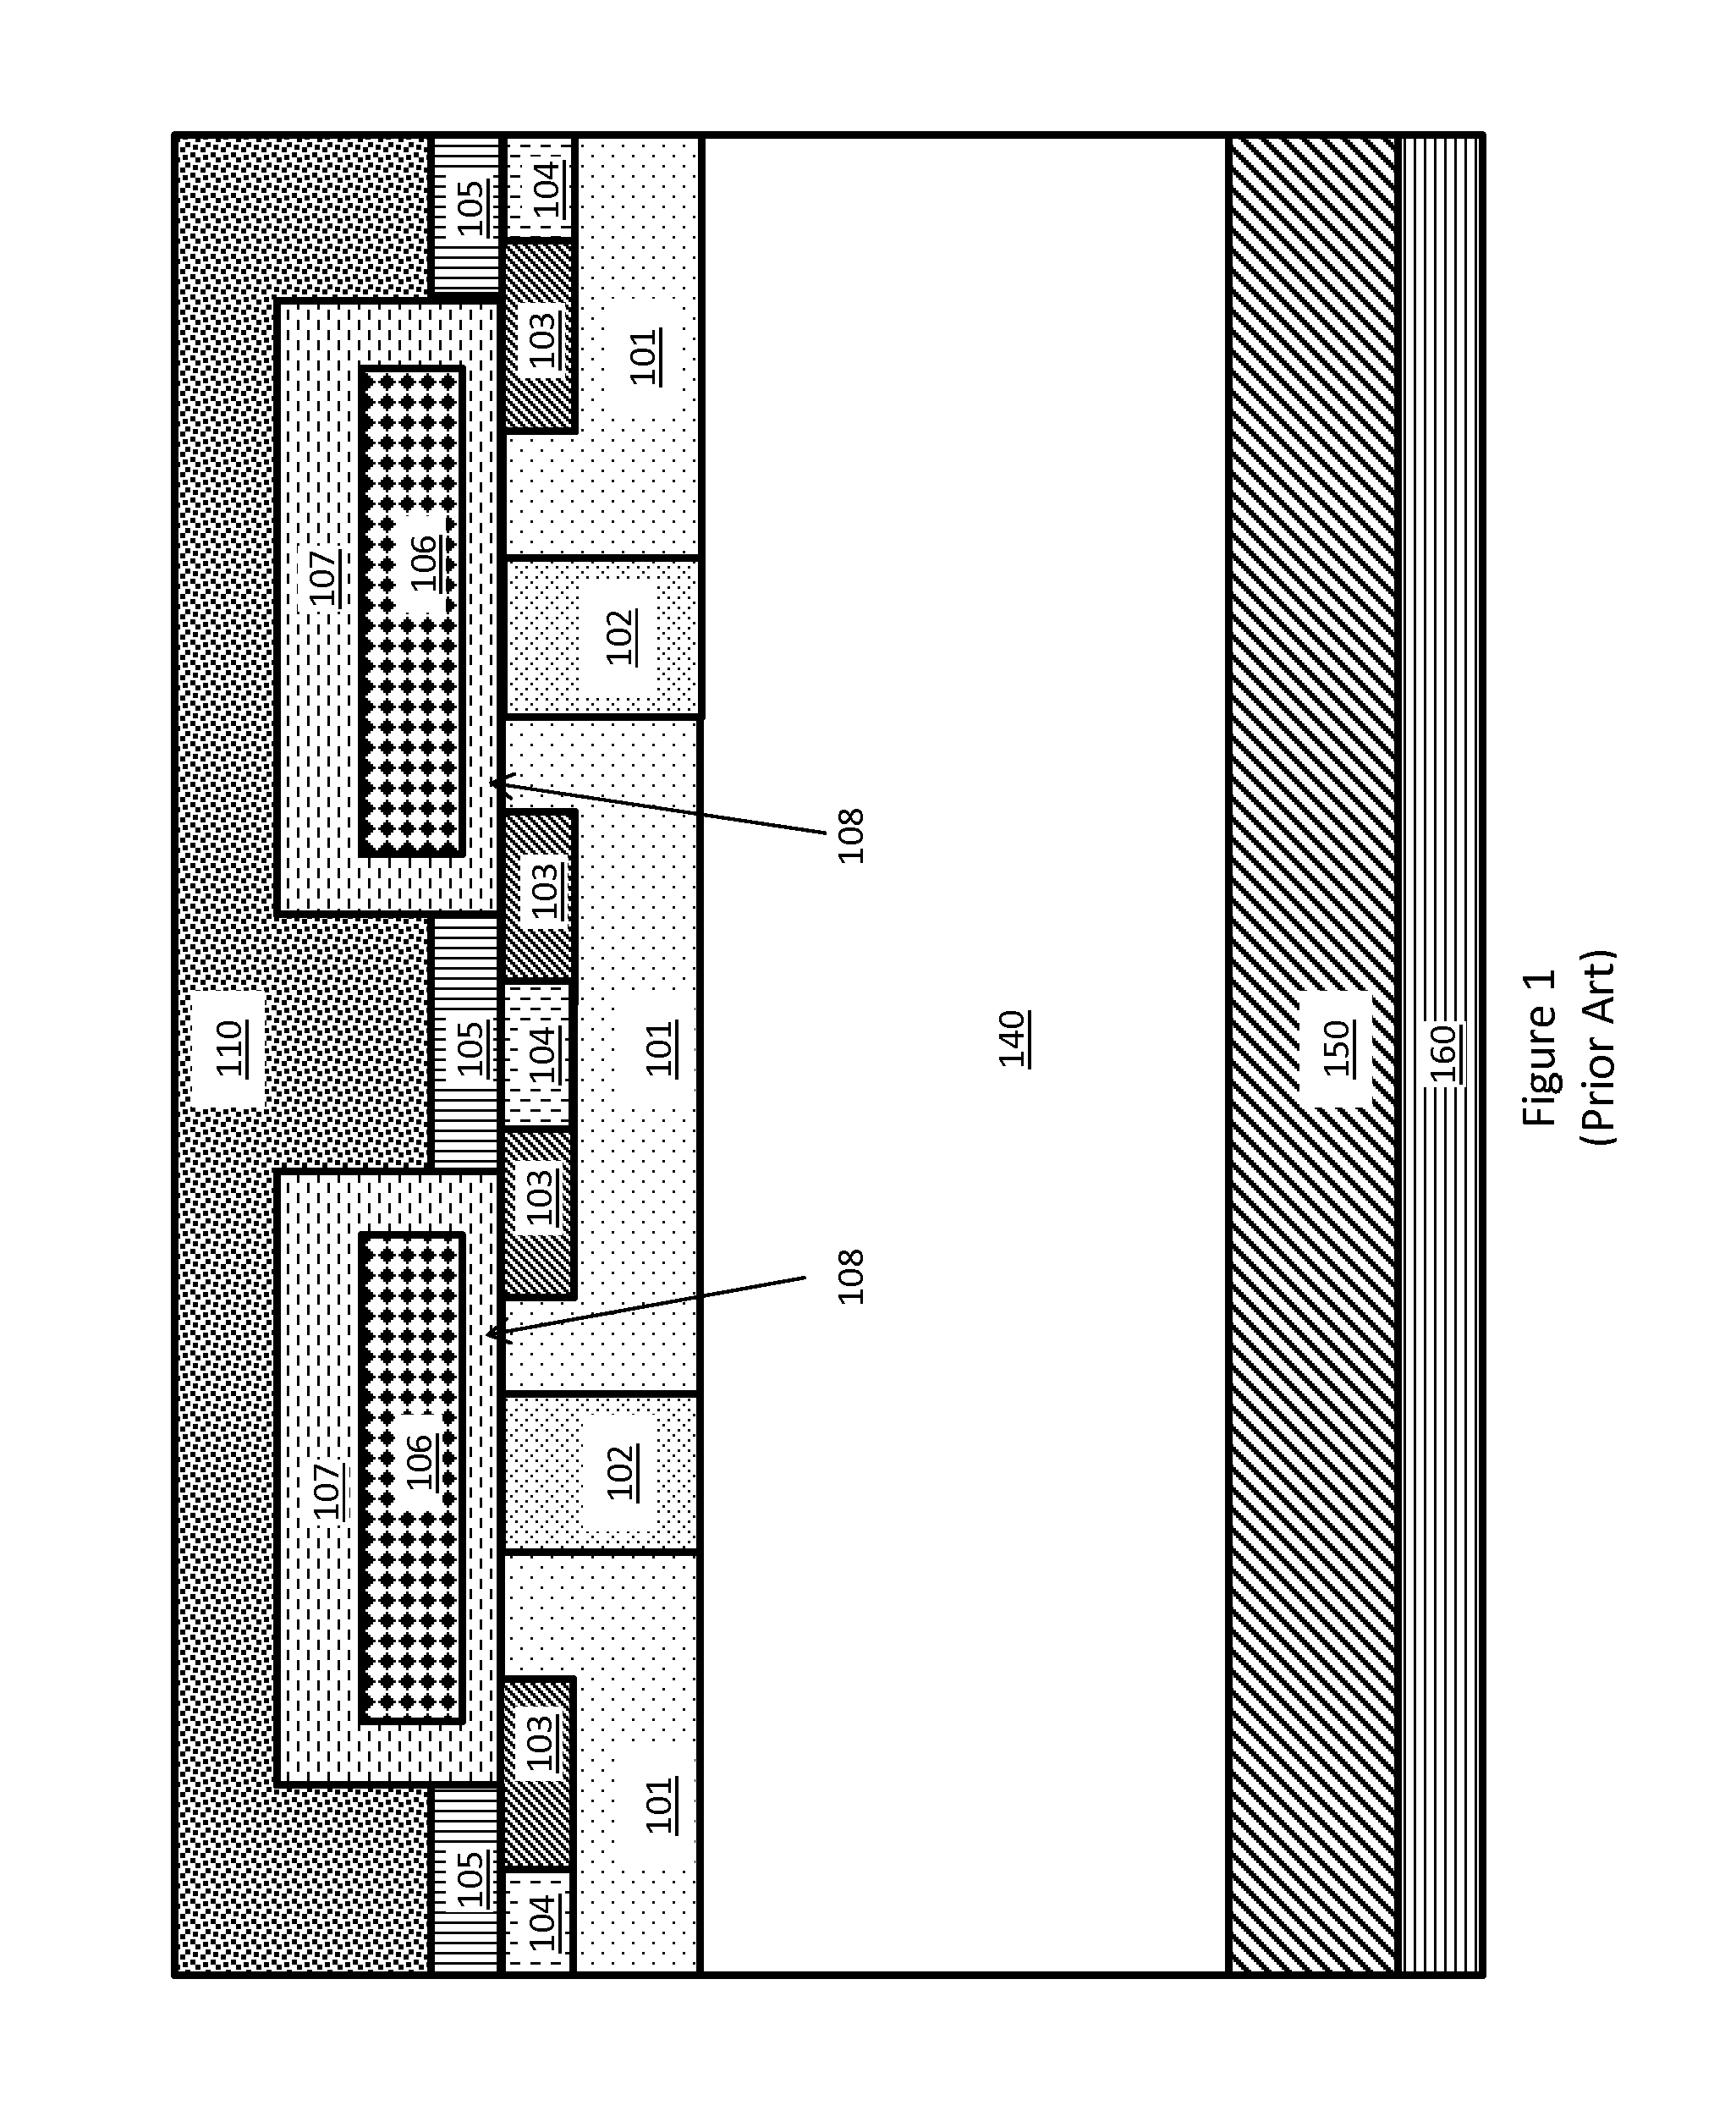 Silicon carbide MOSFET with integrated MOS diode